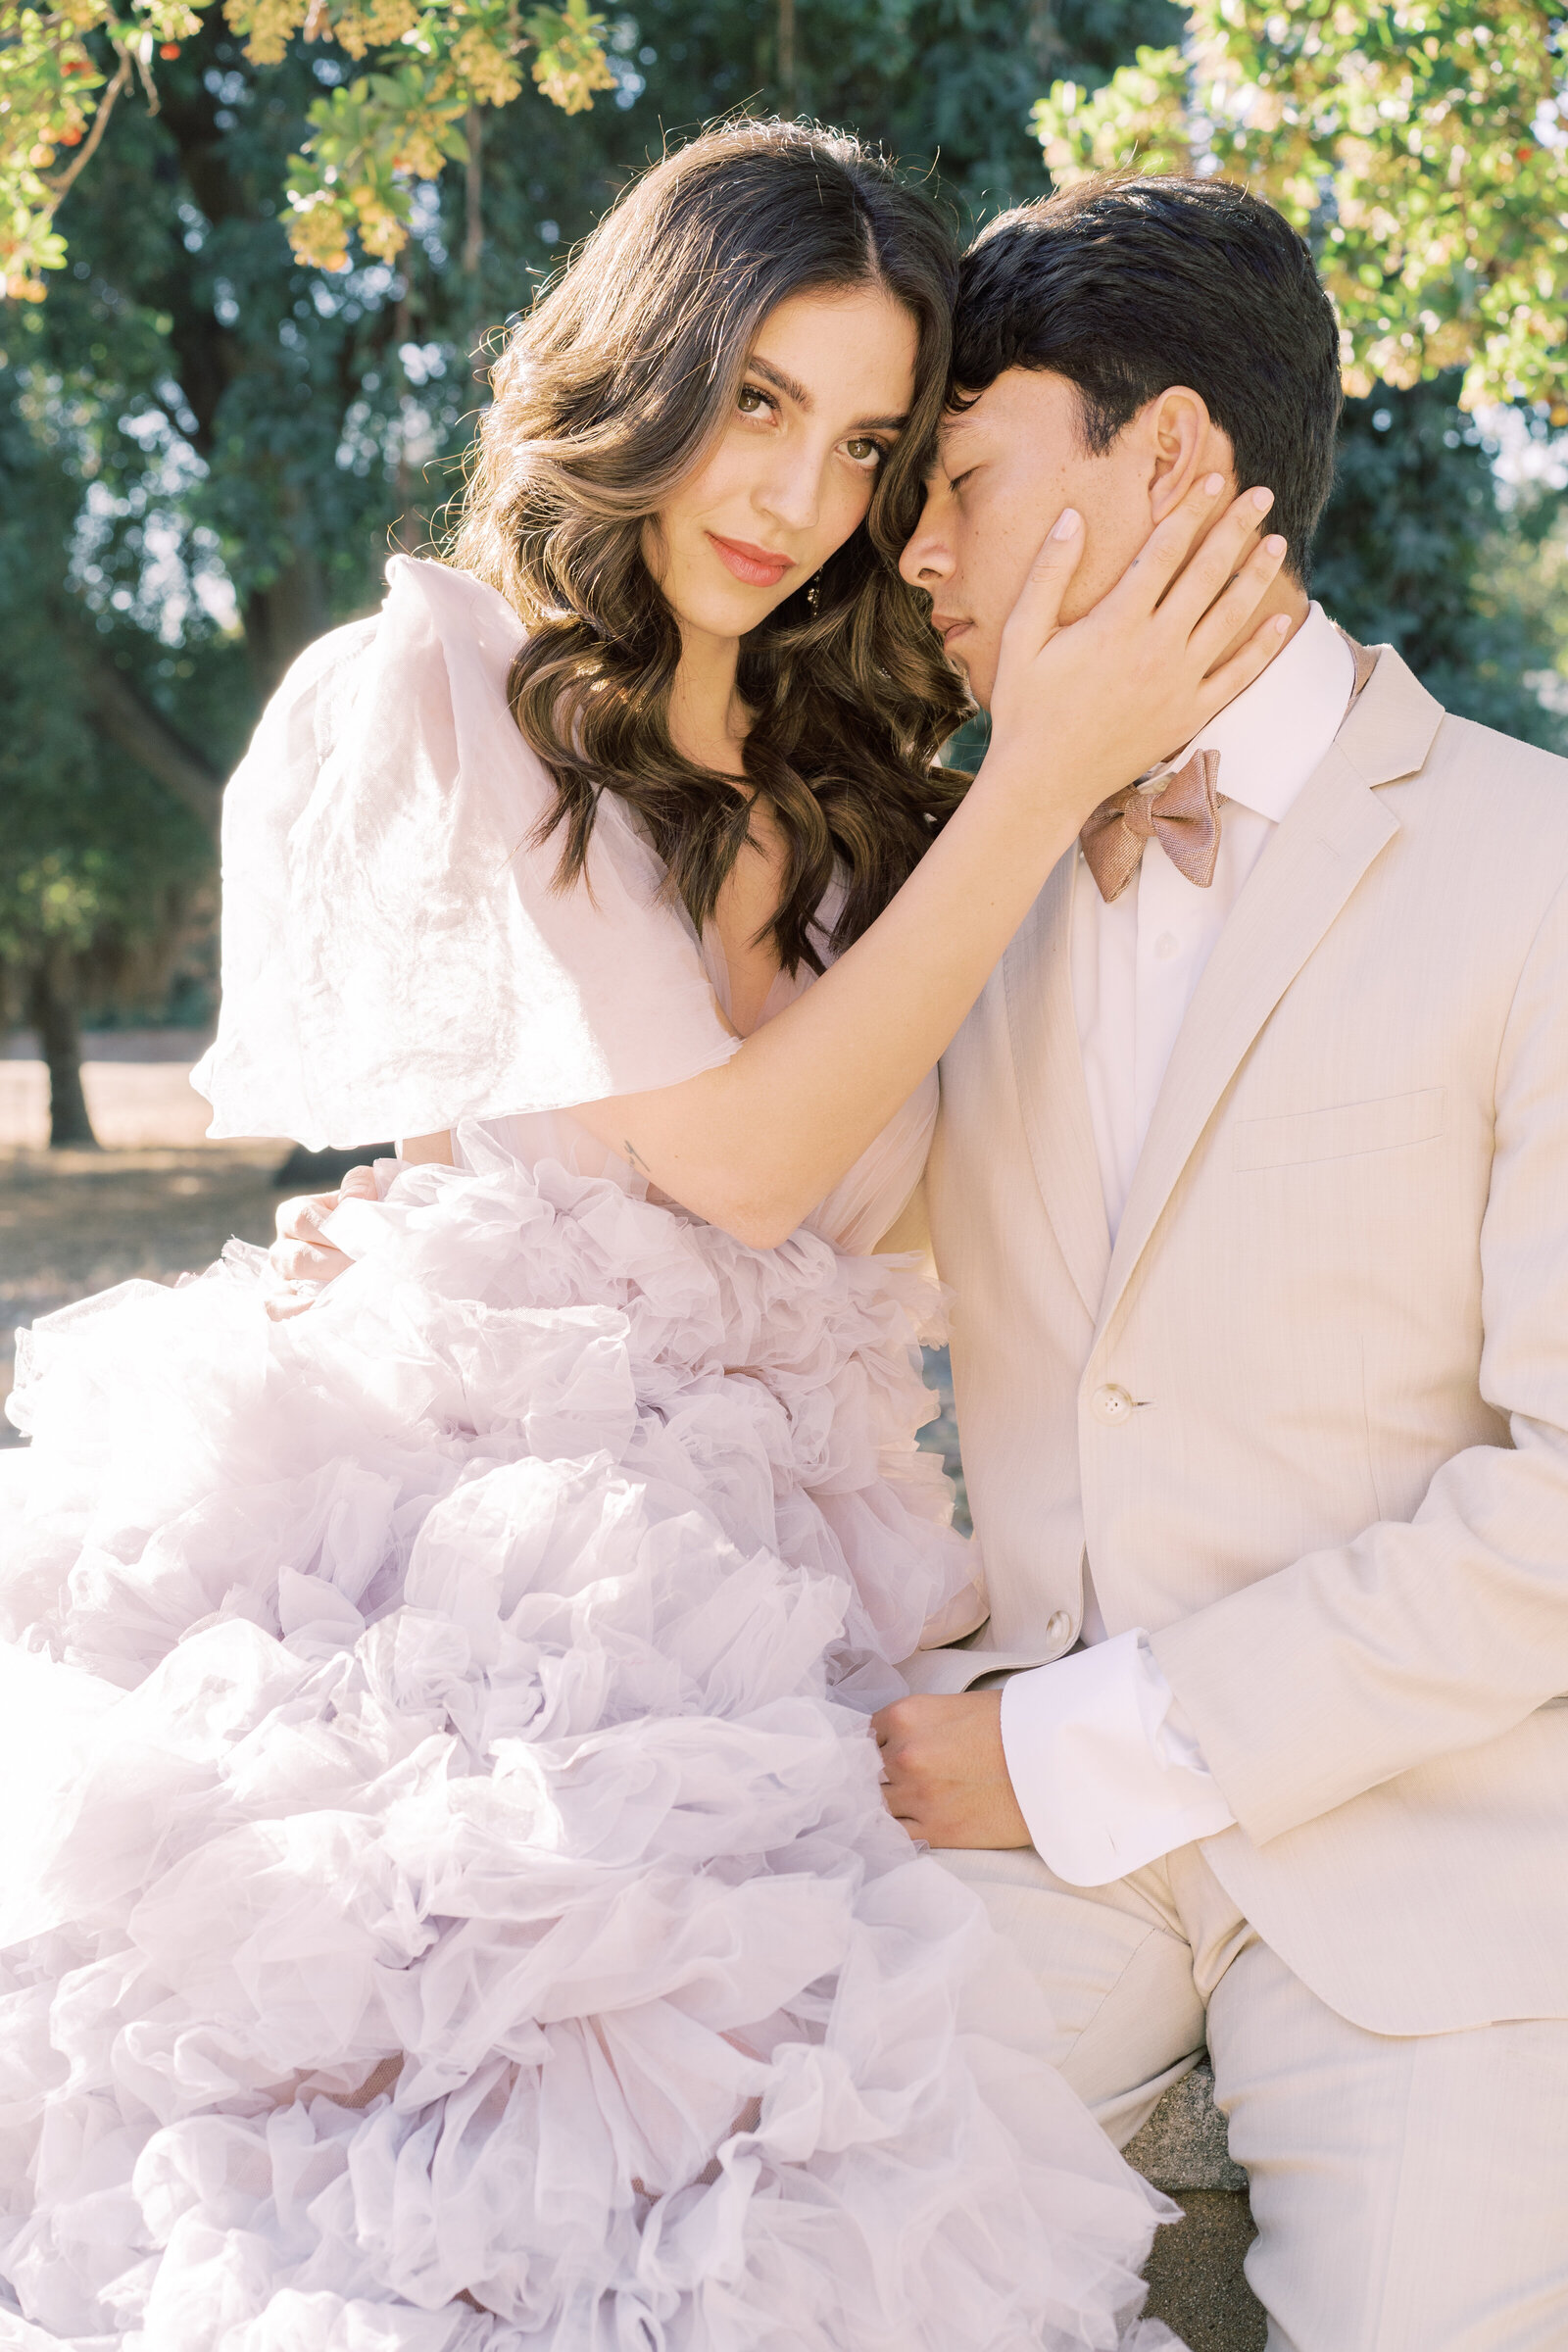 Portrait of bride and groom in a lavender gown and cream suit embracing outdoors.